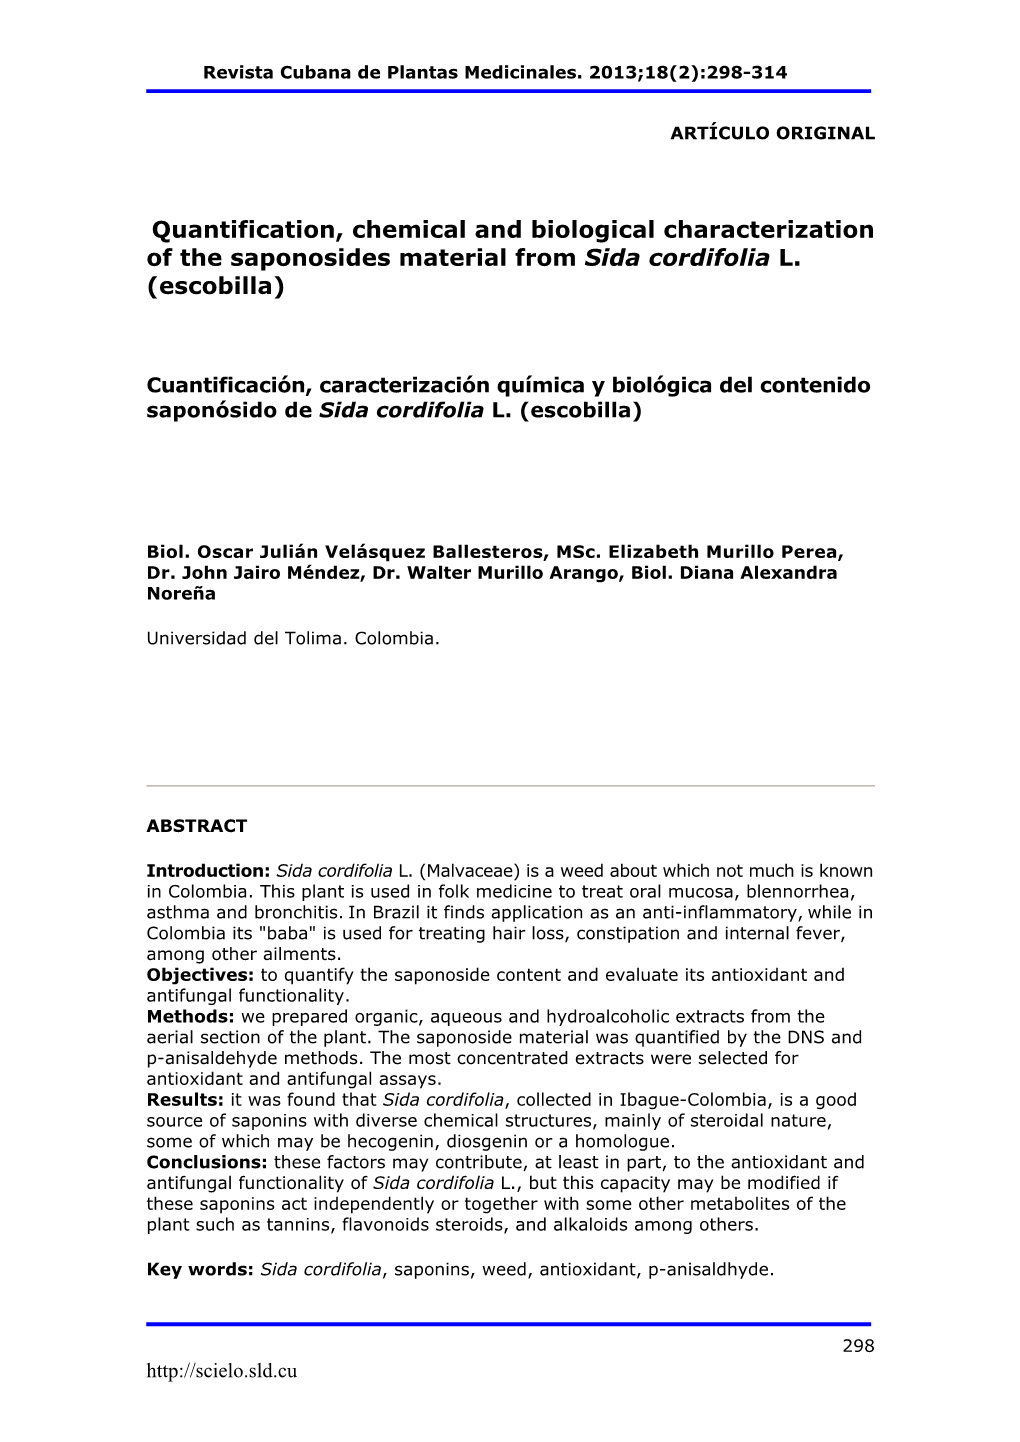 Quantification, Chemical and Biological Characterization of the Saponosides Material from Sida Cordifolia L